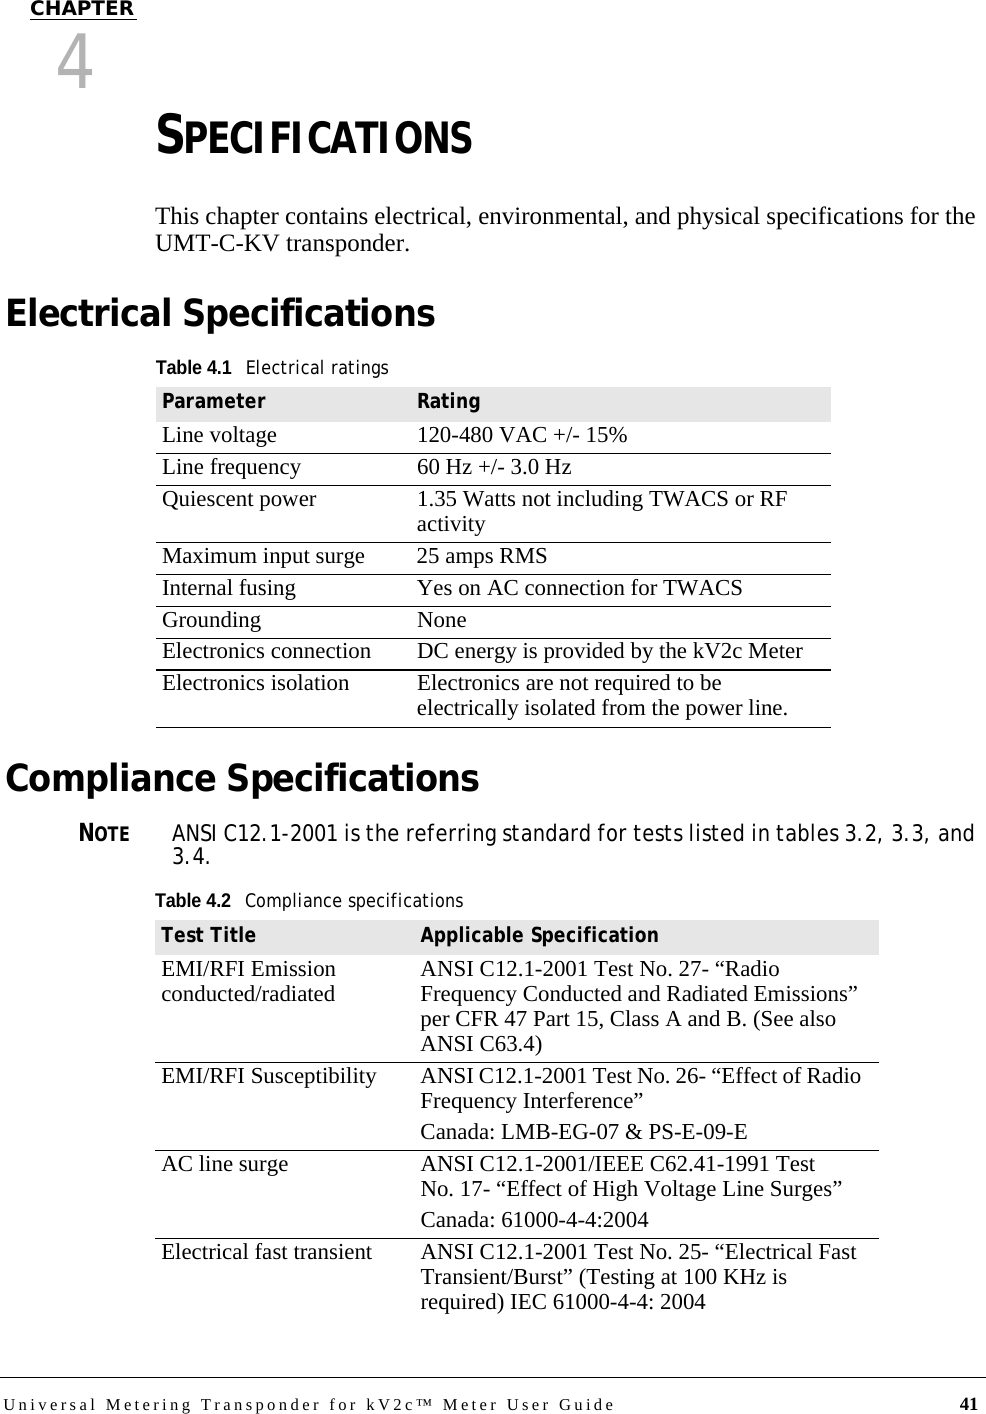 Universal Metering Transponder for kV2c™ Meter User Guide 41CHAPTER4SPECIFICATIONSThis chapter contains electrical, environmental, and physical specifications for the UMT-C-KV transponder.Electrical SpecificationsCompliance SpecificationsNOTEANSI C12.1-2001 is the referring standard for tests listed in tables 3.2, 3.3, and 3.4. Table 4.1Electrical ratingsParameter RatingLine voltage 120-480 VAC +/- 15%Line frequency 60 Hz +/- 3.0 HzQuiescent power 1.35 Watts not including TWACS or RF activityMaximum input surge 25 amps RMSInternal fusing Yes on AC connection for TWACSGrounding NoneElectronics connection DC energy is provided by the kV2c MeterElectronics isolation Electronics are not required to be electrically isolated from the power line.Table 4.2Compliance specificationsTest Title Applicable SpecificationEMI/RFI Emission conducted/radiated ANSI C12.1-2001 Test No. 27- “Radio Frequency Conducted and Radiated Emissions” per CFR 47 Part 15, Class A and B. (See also ANSI C63.4)EMI/RFI Susceptibility ANSI C12.1-2001 Test No. 26- “Effect of Radio Frequency Interference”Canada: LMB-EG-07 &amp; PS-E-09-EAC line surge ANSI C12.1-2001/IEEE C62.41-1991 Test No. 17- “Effect of High Voltage Line Surges”Canada: 61000-4-4:2004Electrical fast transient ANSI C12.1-2001 Test No. 25- “Electrical Fast Transient/Burst” (Testing at 100 KHz is required) IEC 61000-4-4: 2004